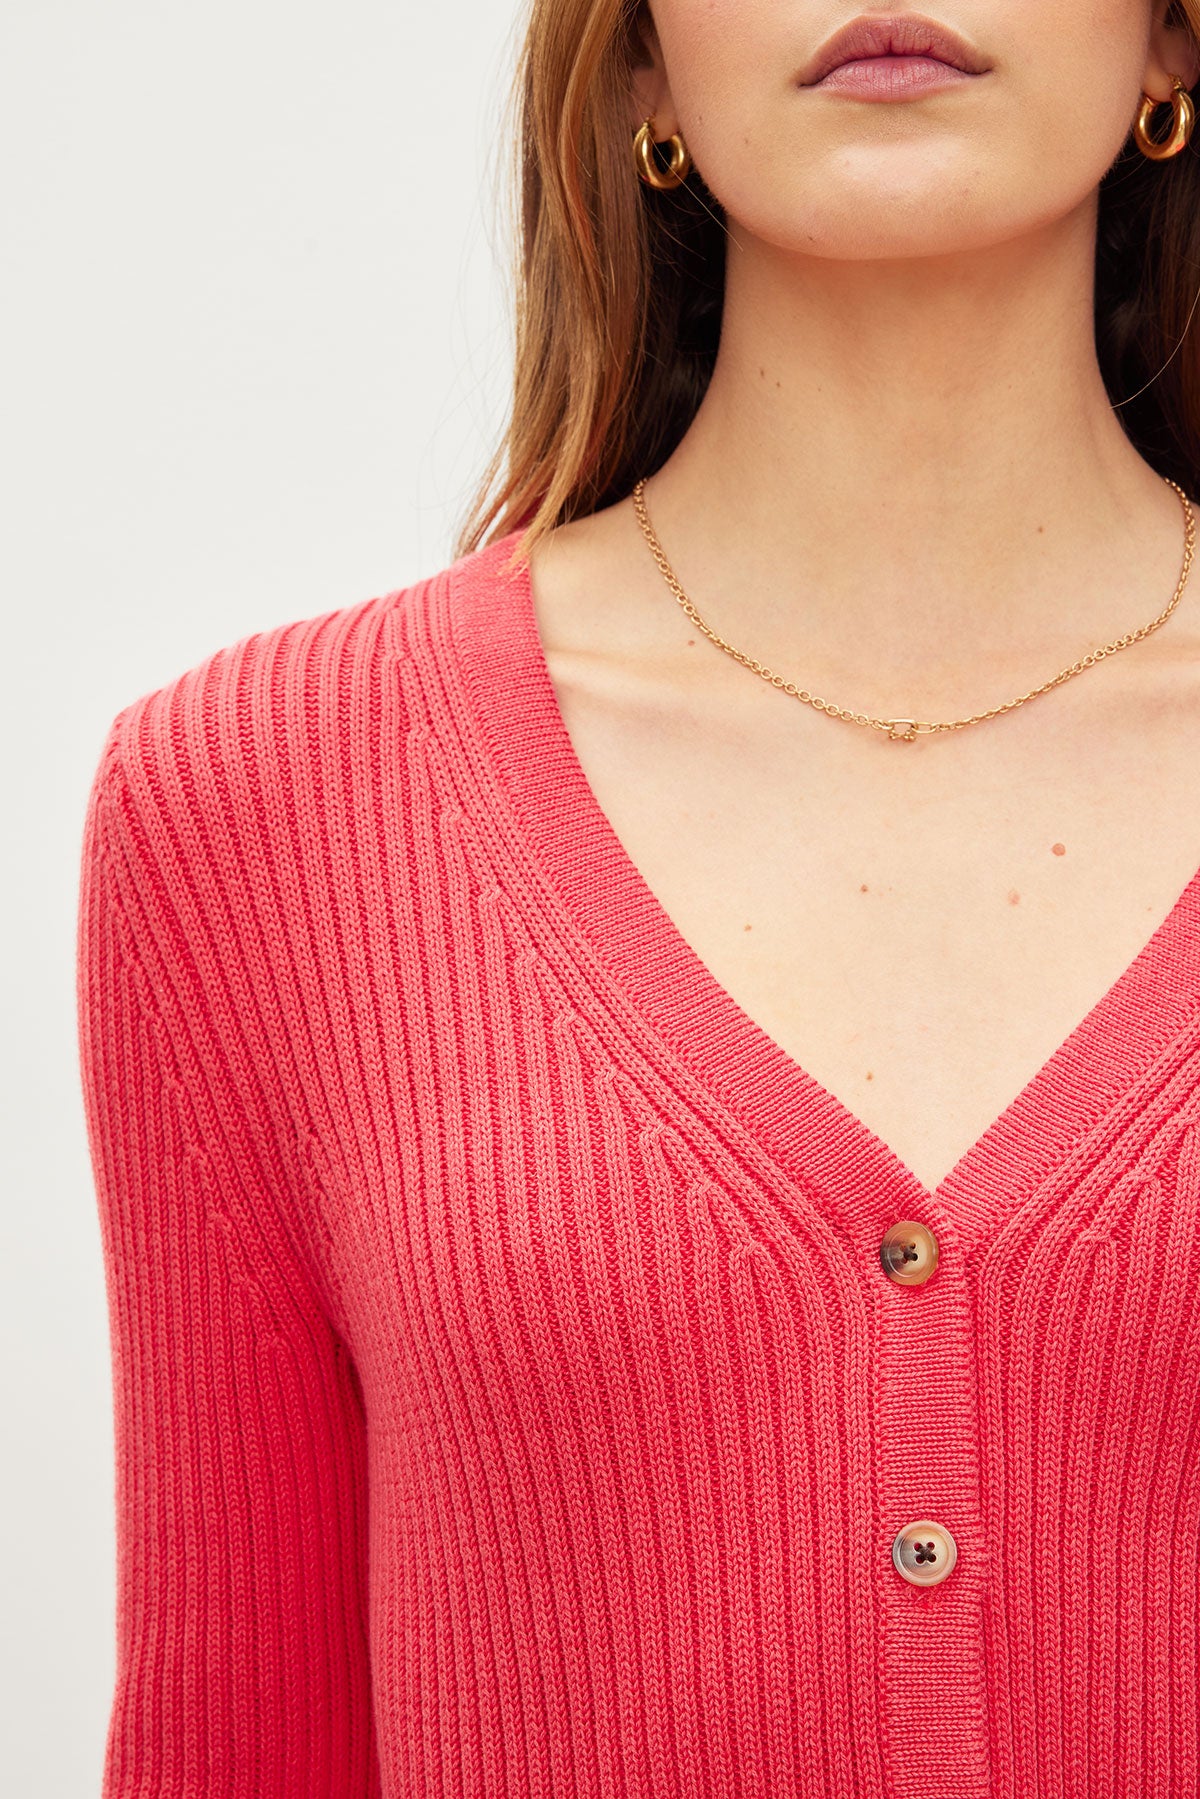 Close-up of a woman wearing a Velvet by Graham & Spencer HYDIE BUTTON FRONT CARDIGAN in coral cotton ribbed knit with buttons, a subtle necklace, and hoop earrings.-36387940466881